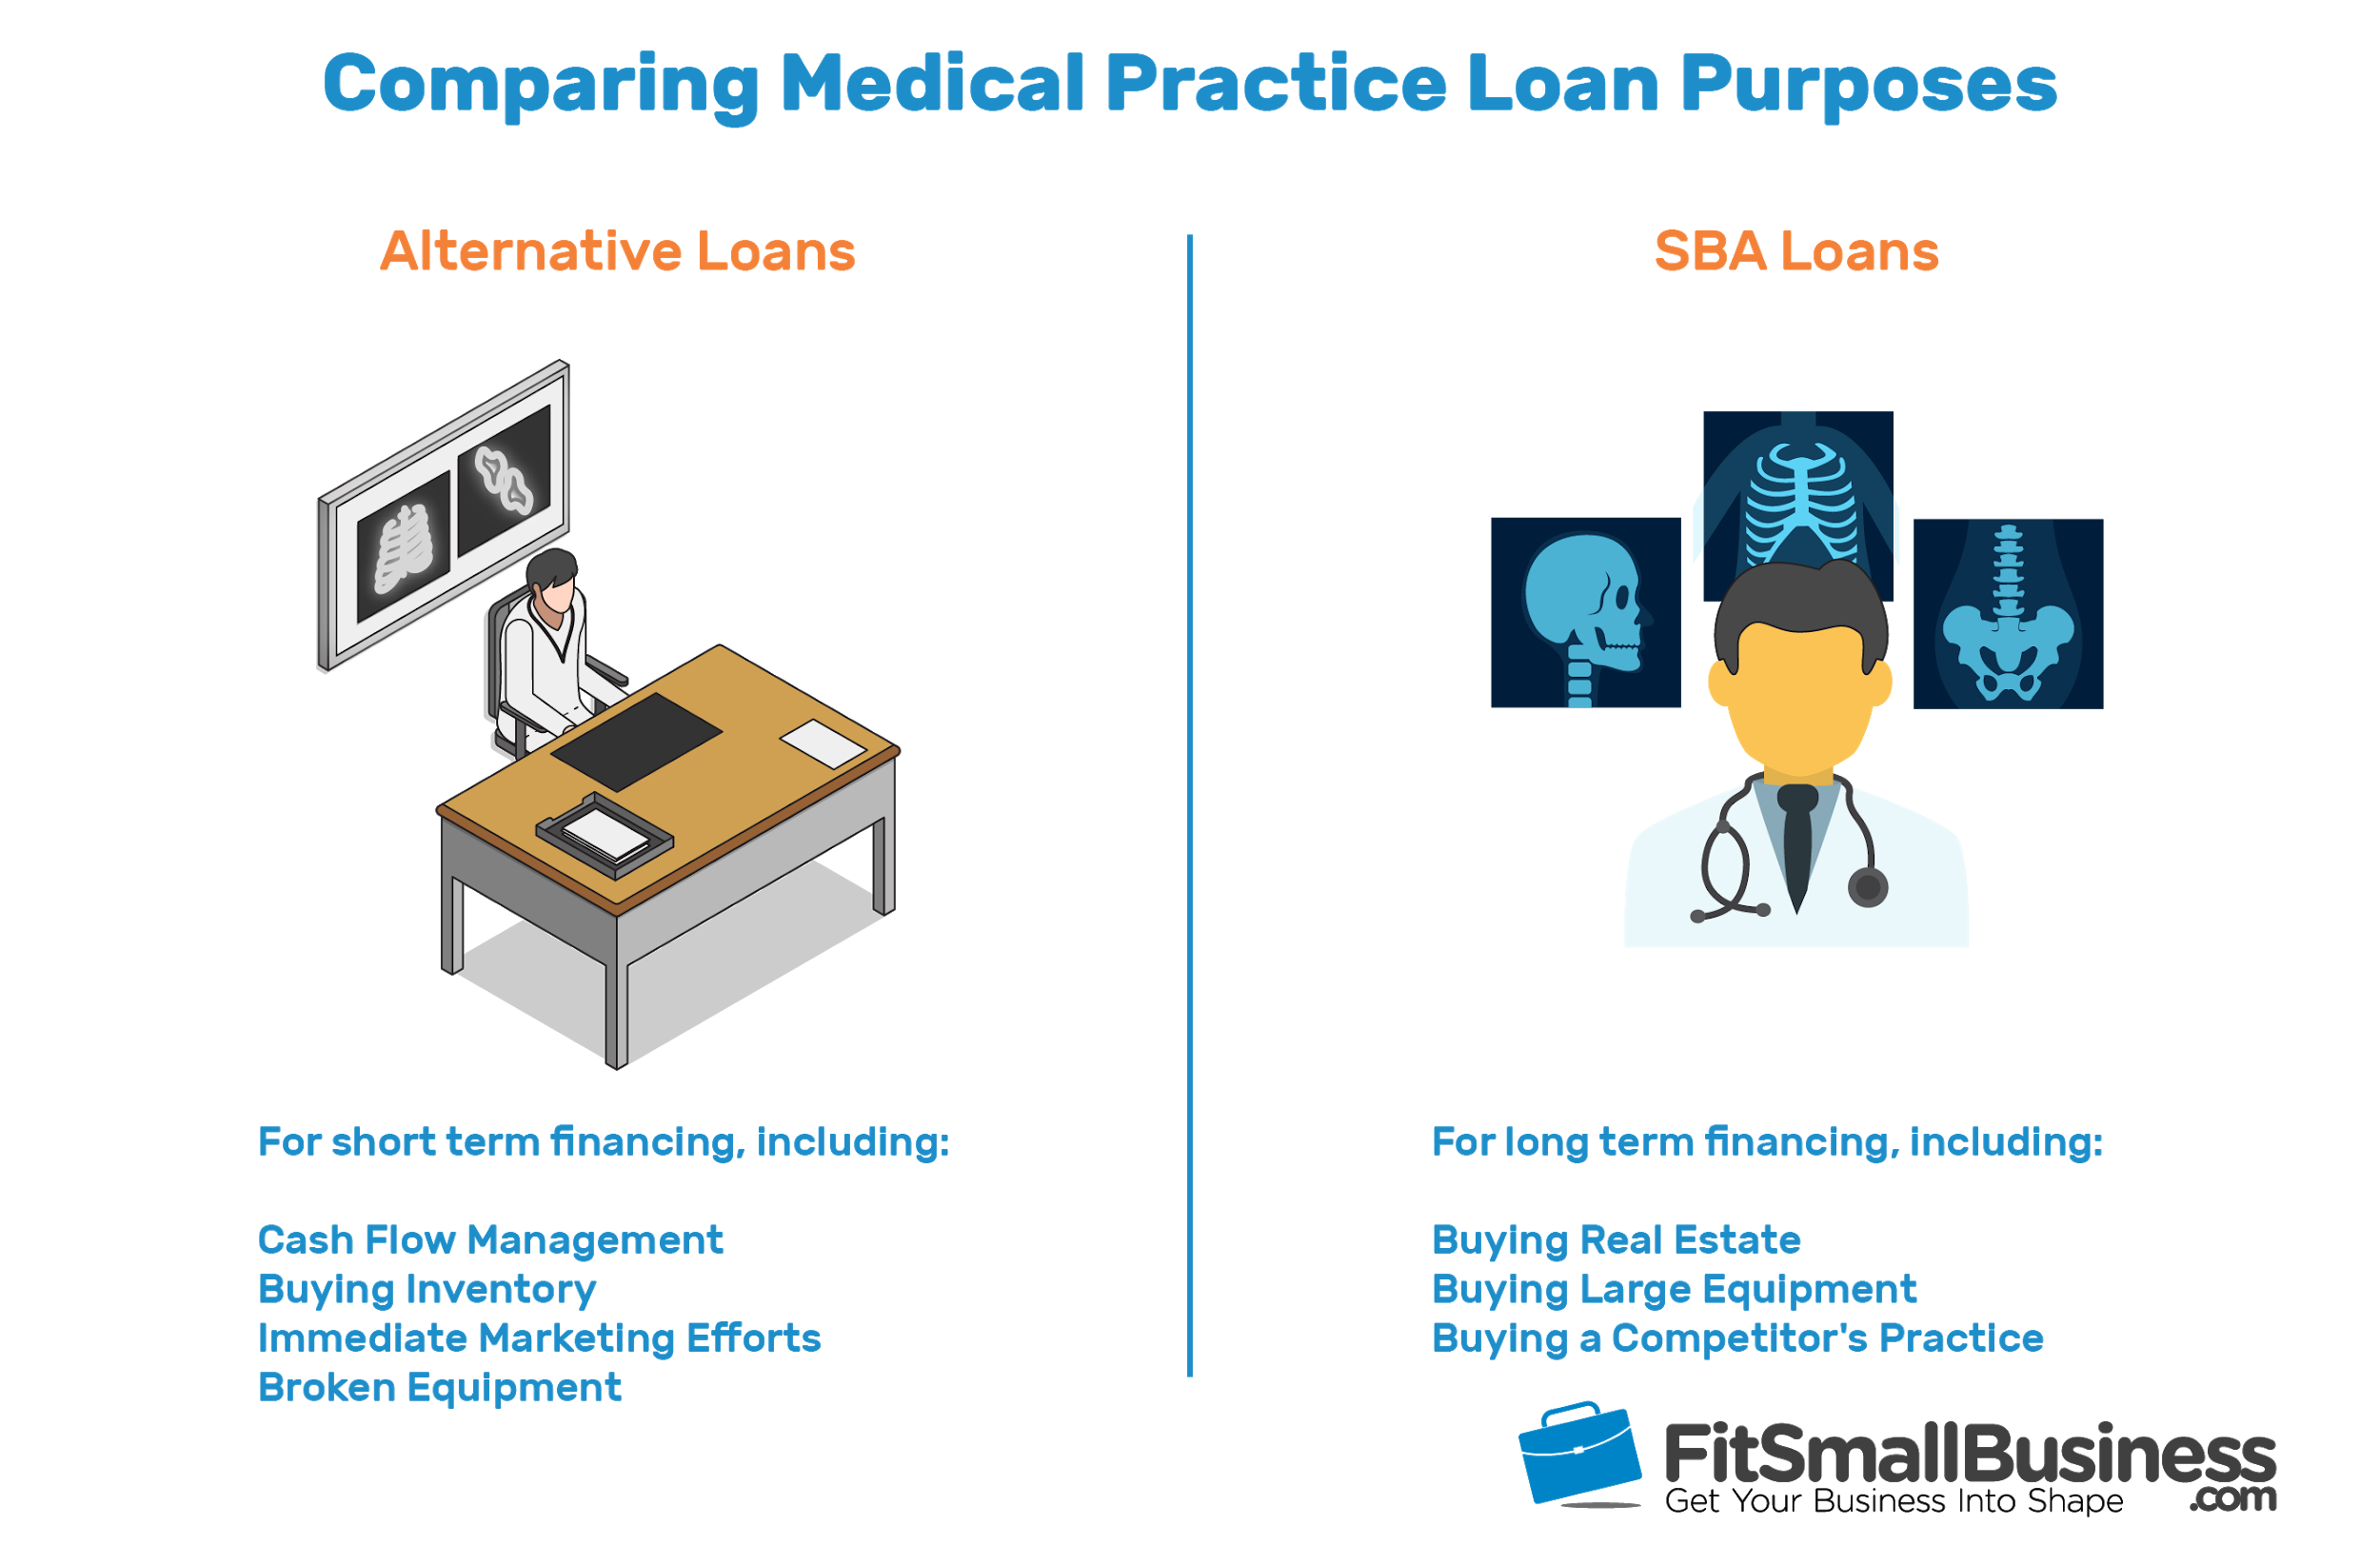 Medical Practice Loans Where To Get Business Loans For Doctors - infographic comparing medical malpractice loan purposes